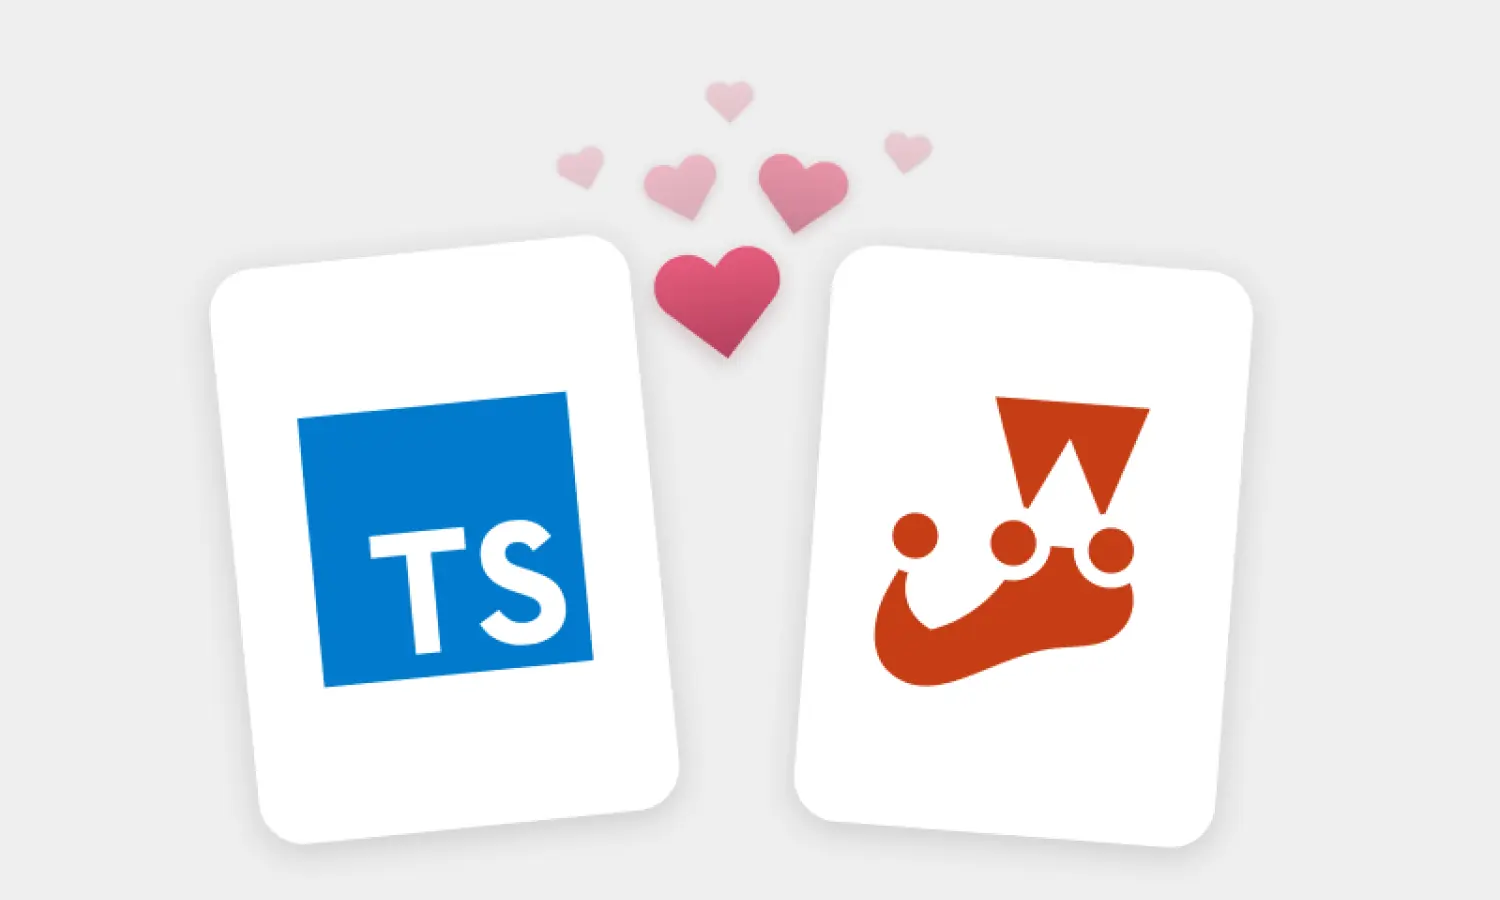 Why we added Typescript and Jest to our tech stack